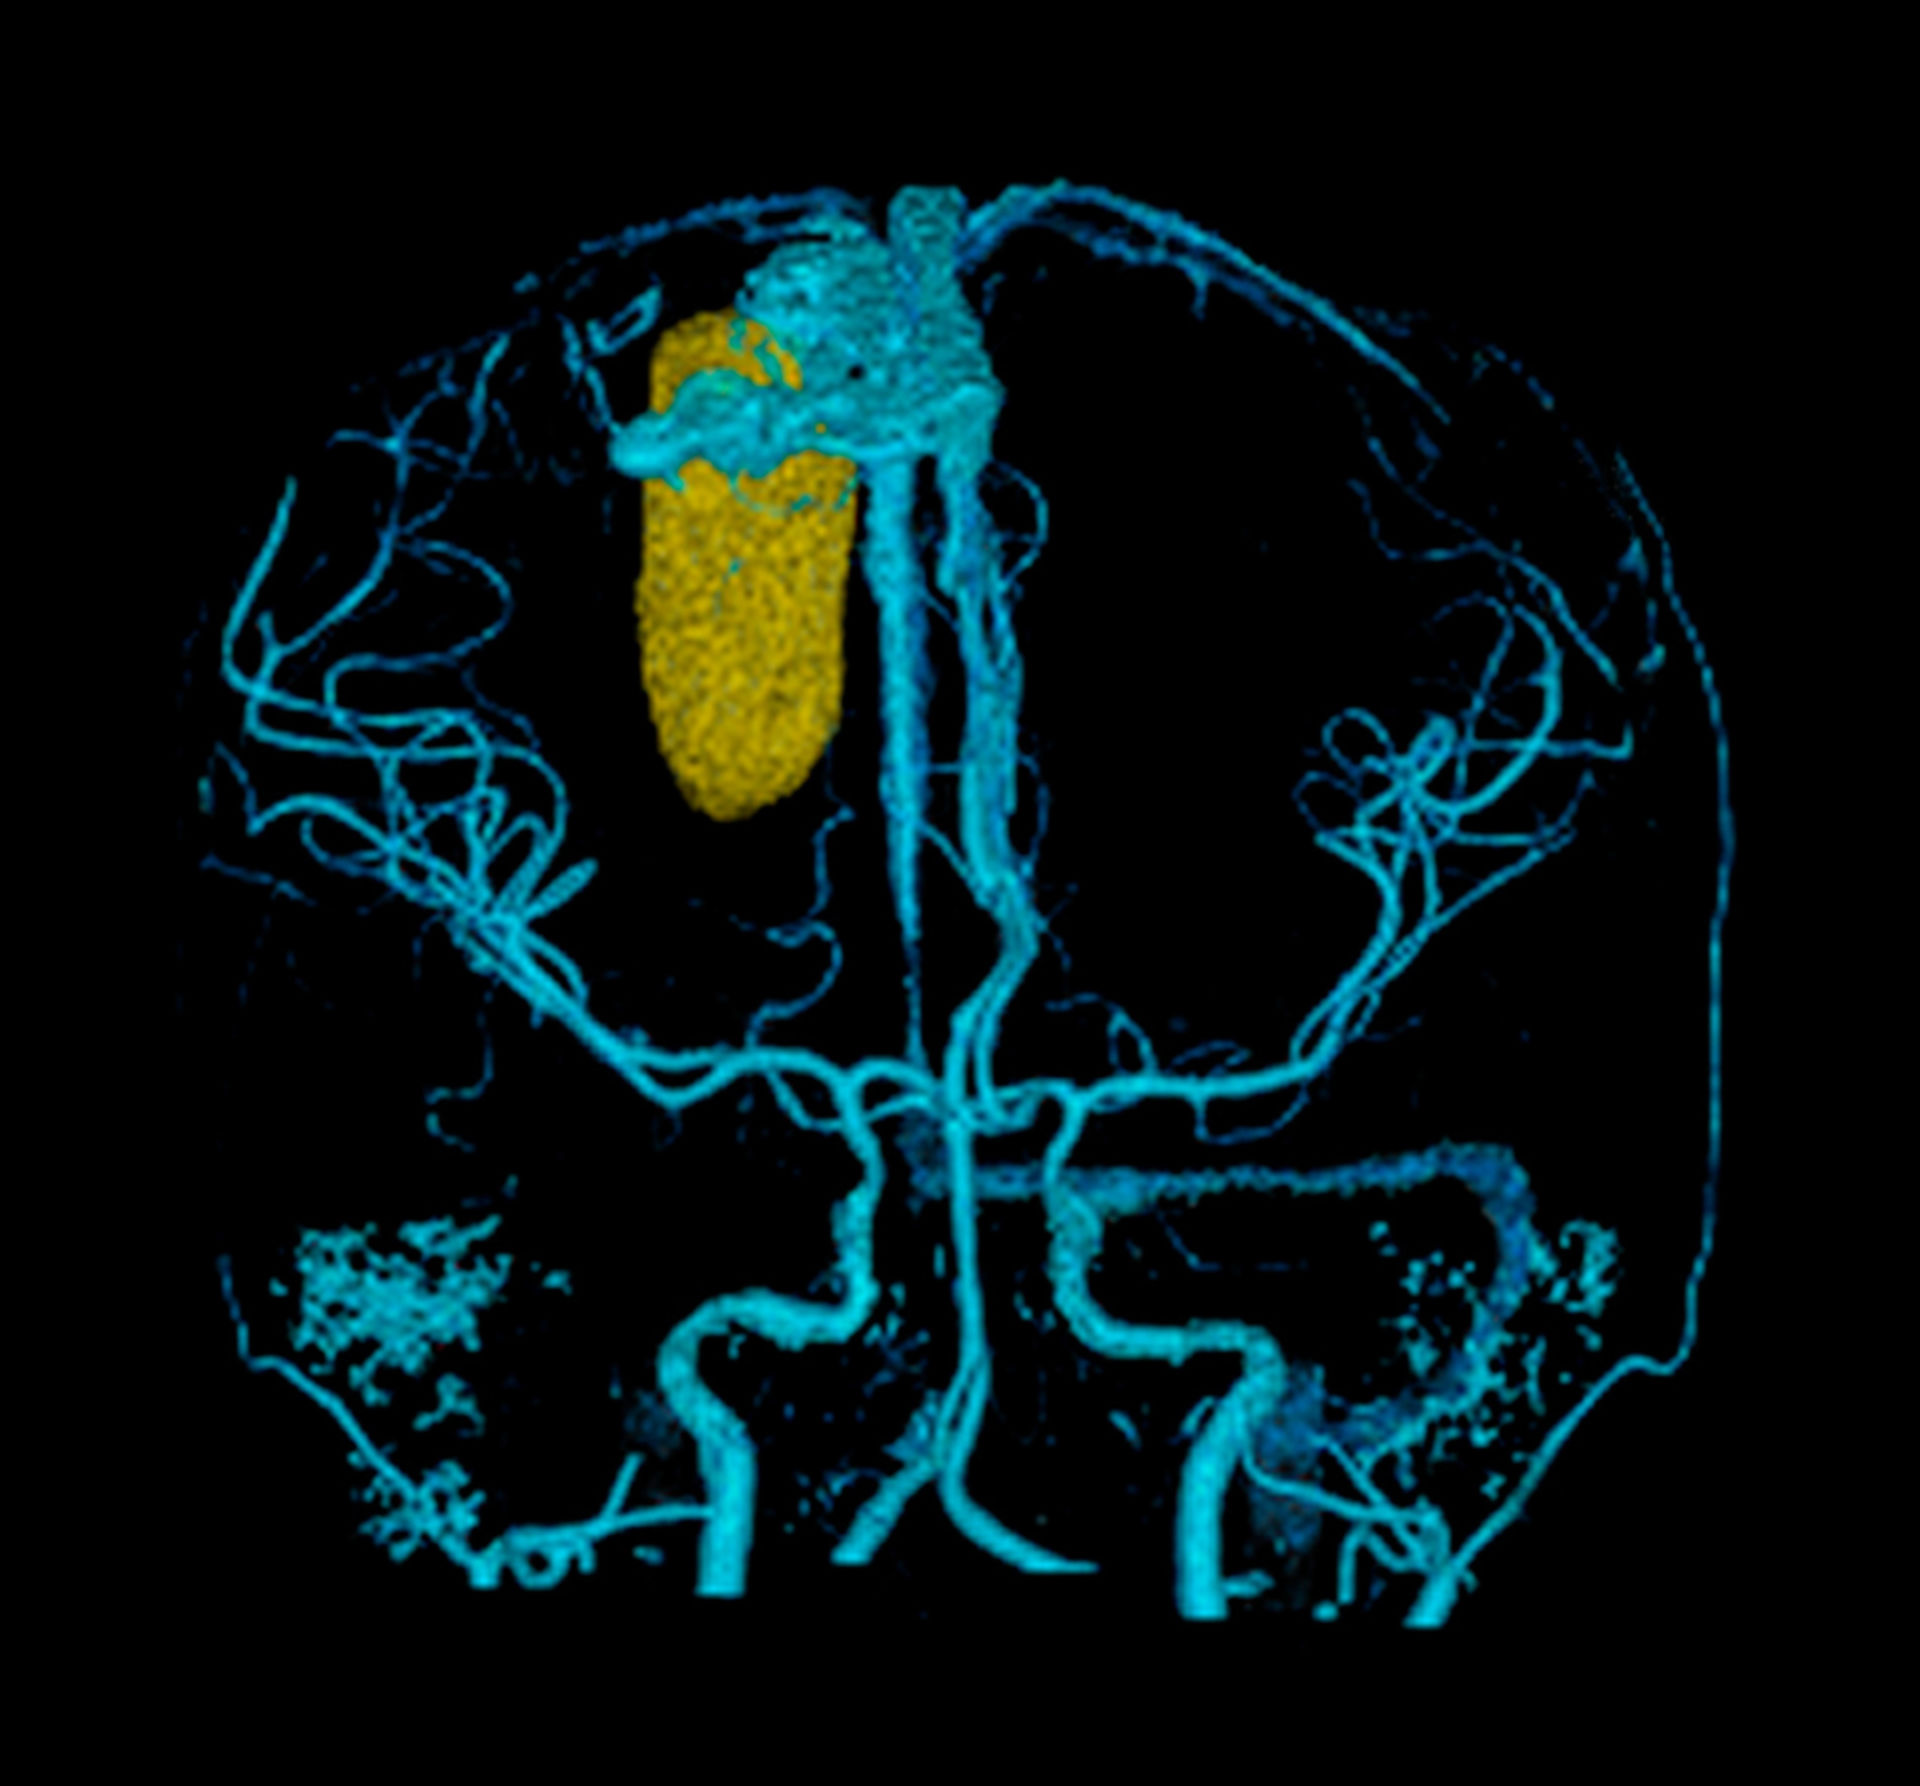 Third contest for computed tomography pictures – 